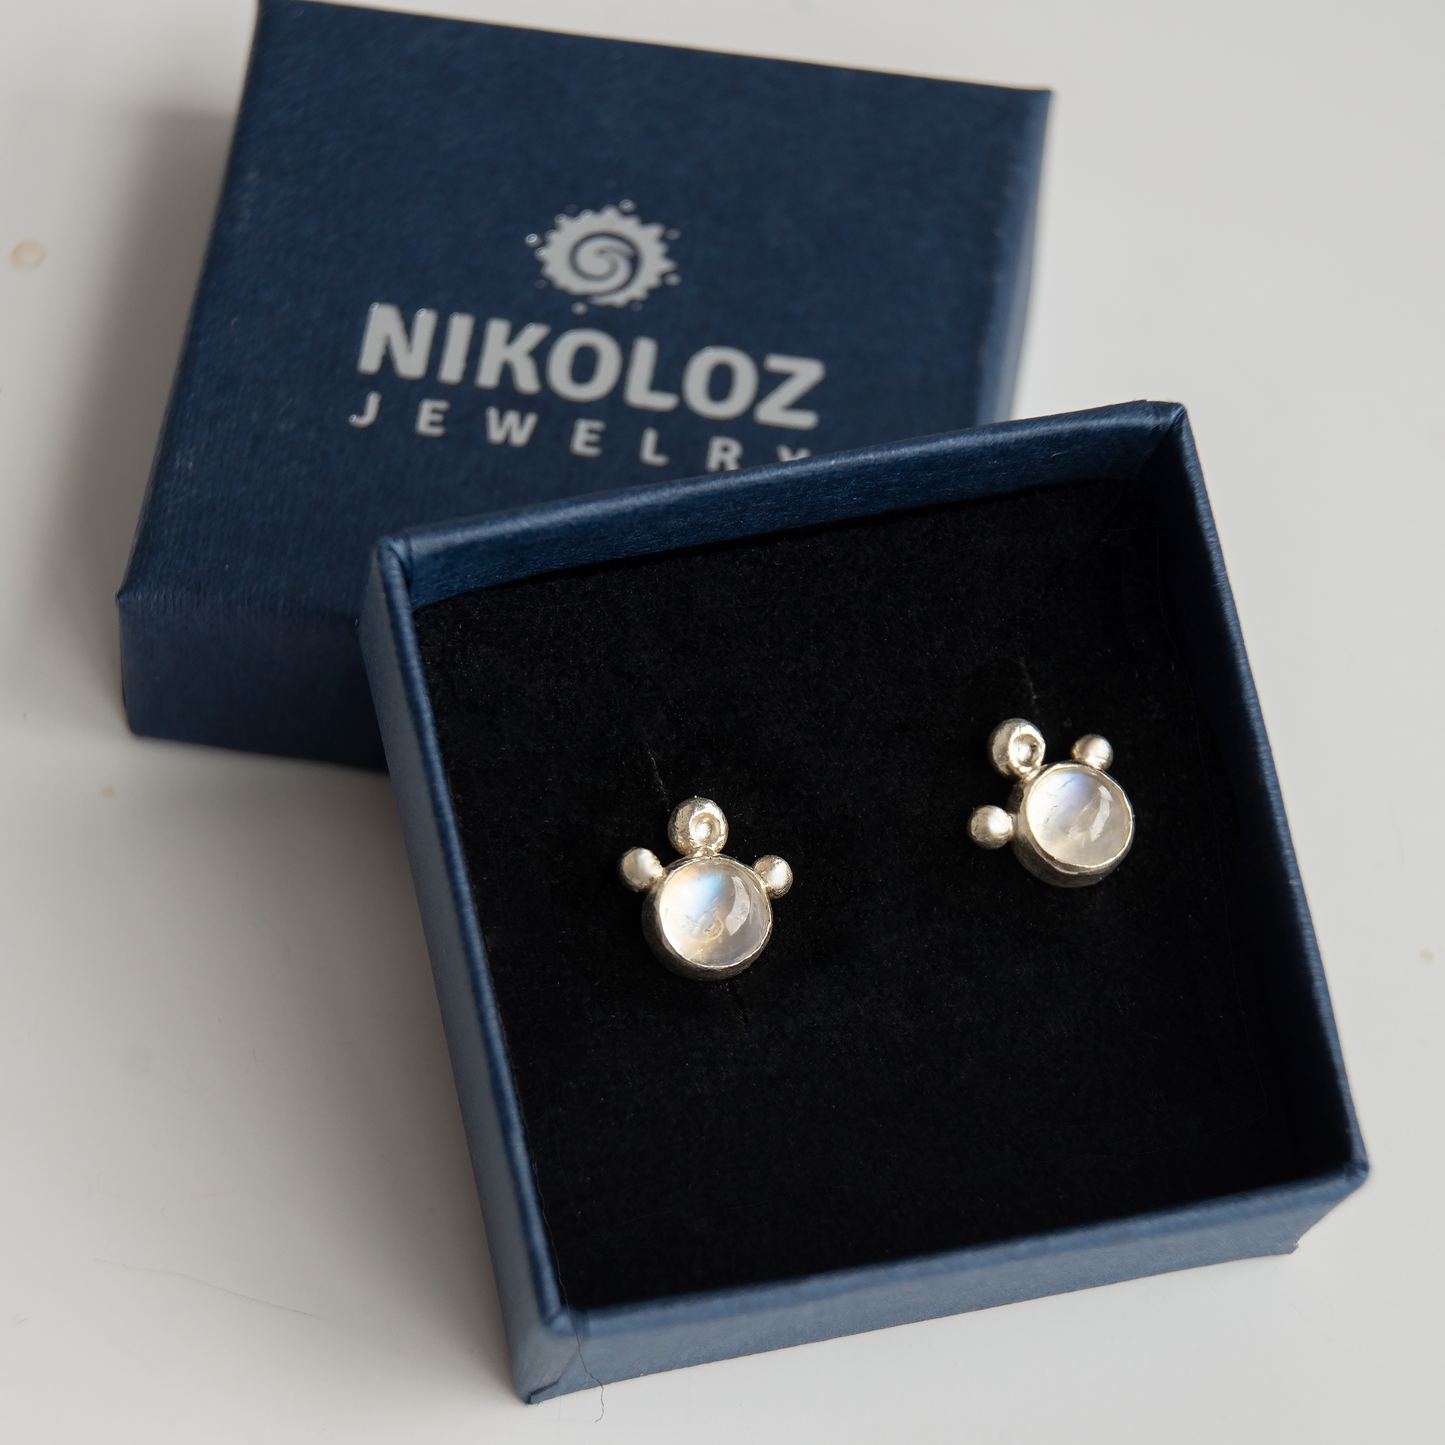 Moonstone minimalistic  Studs With Silver Beads